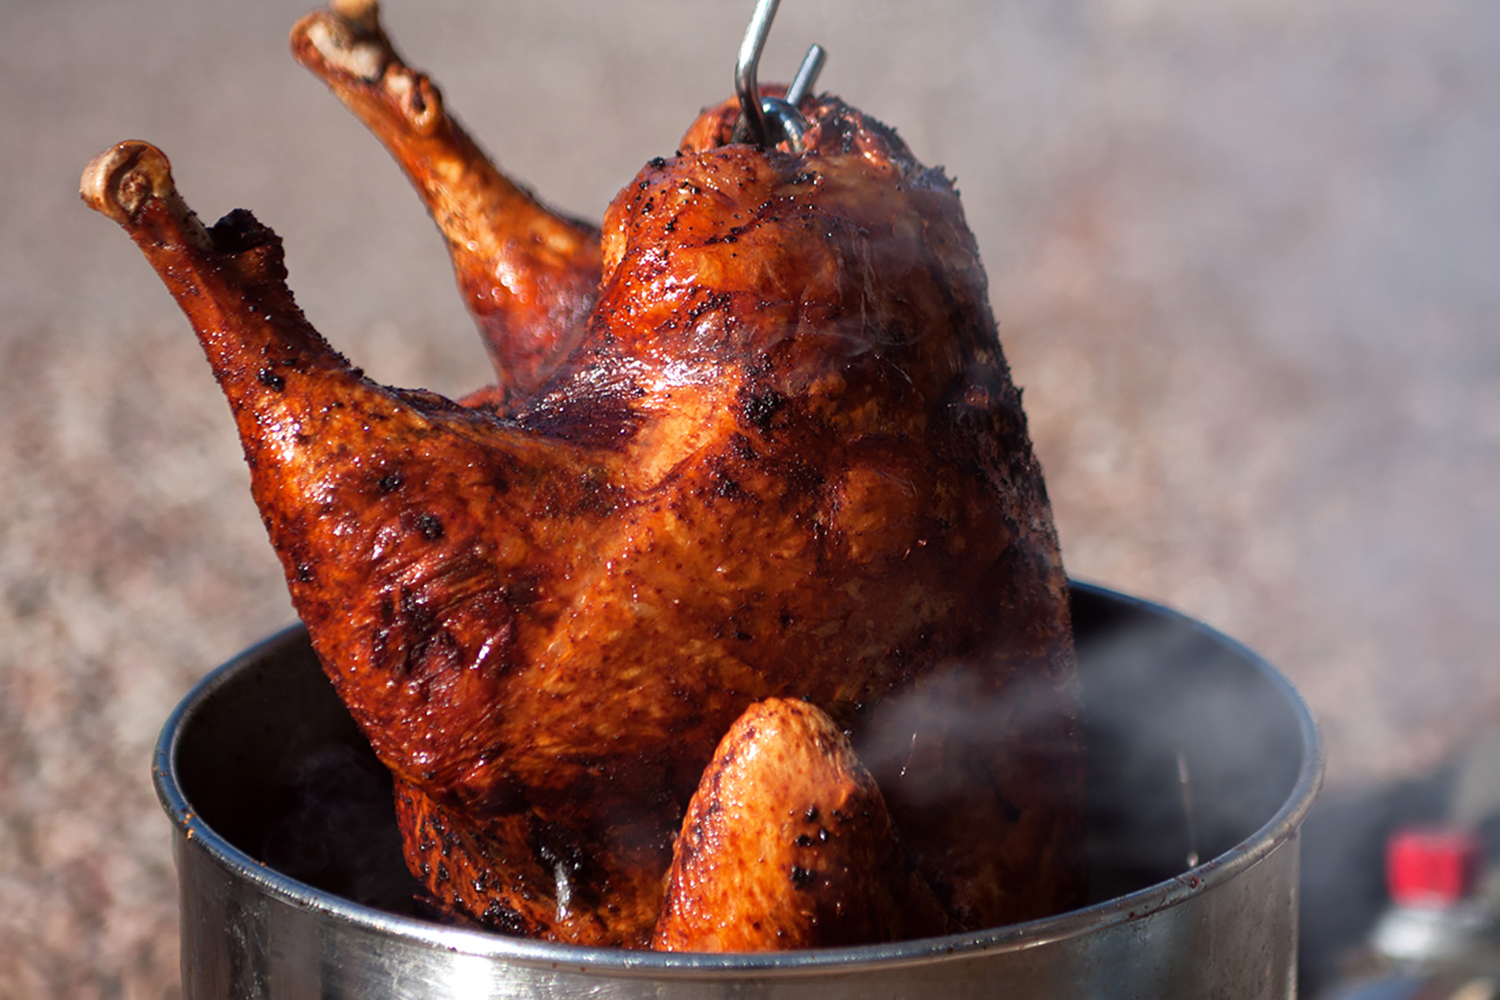 Temperature Matters: Meat Thermometer Guidelines - National Turkey  Federation